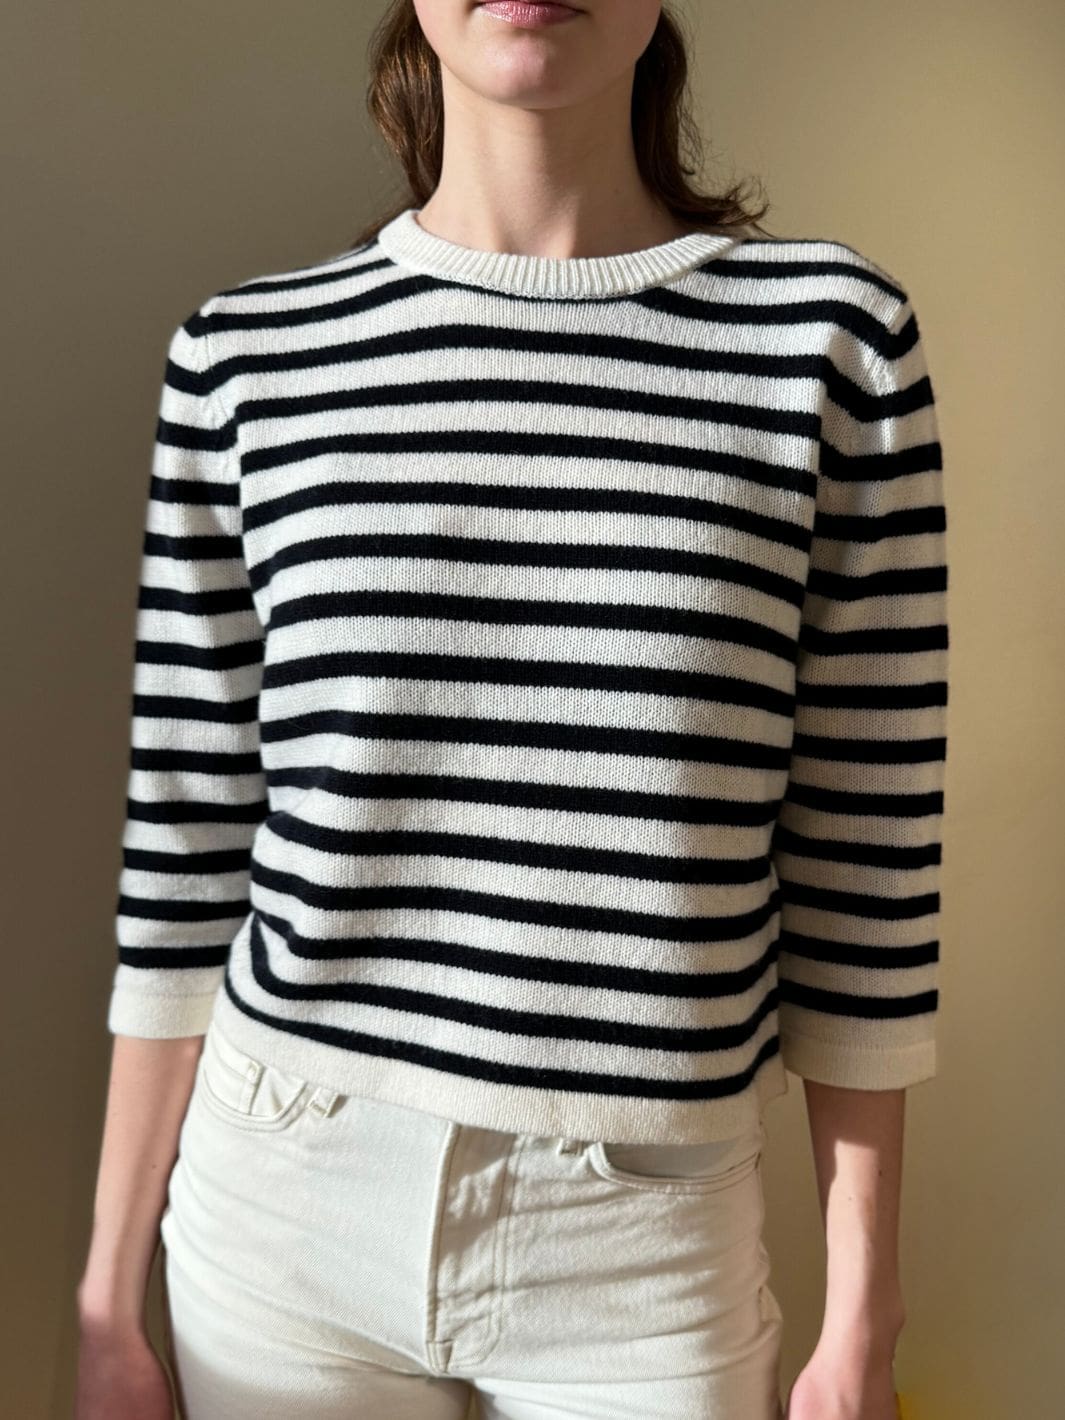 Allude Knit Genser | 3/4 RD-Sweater Navy/Cream Stripes